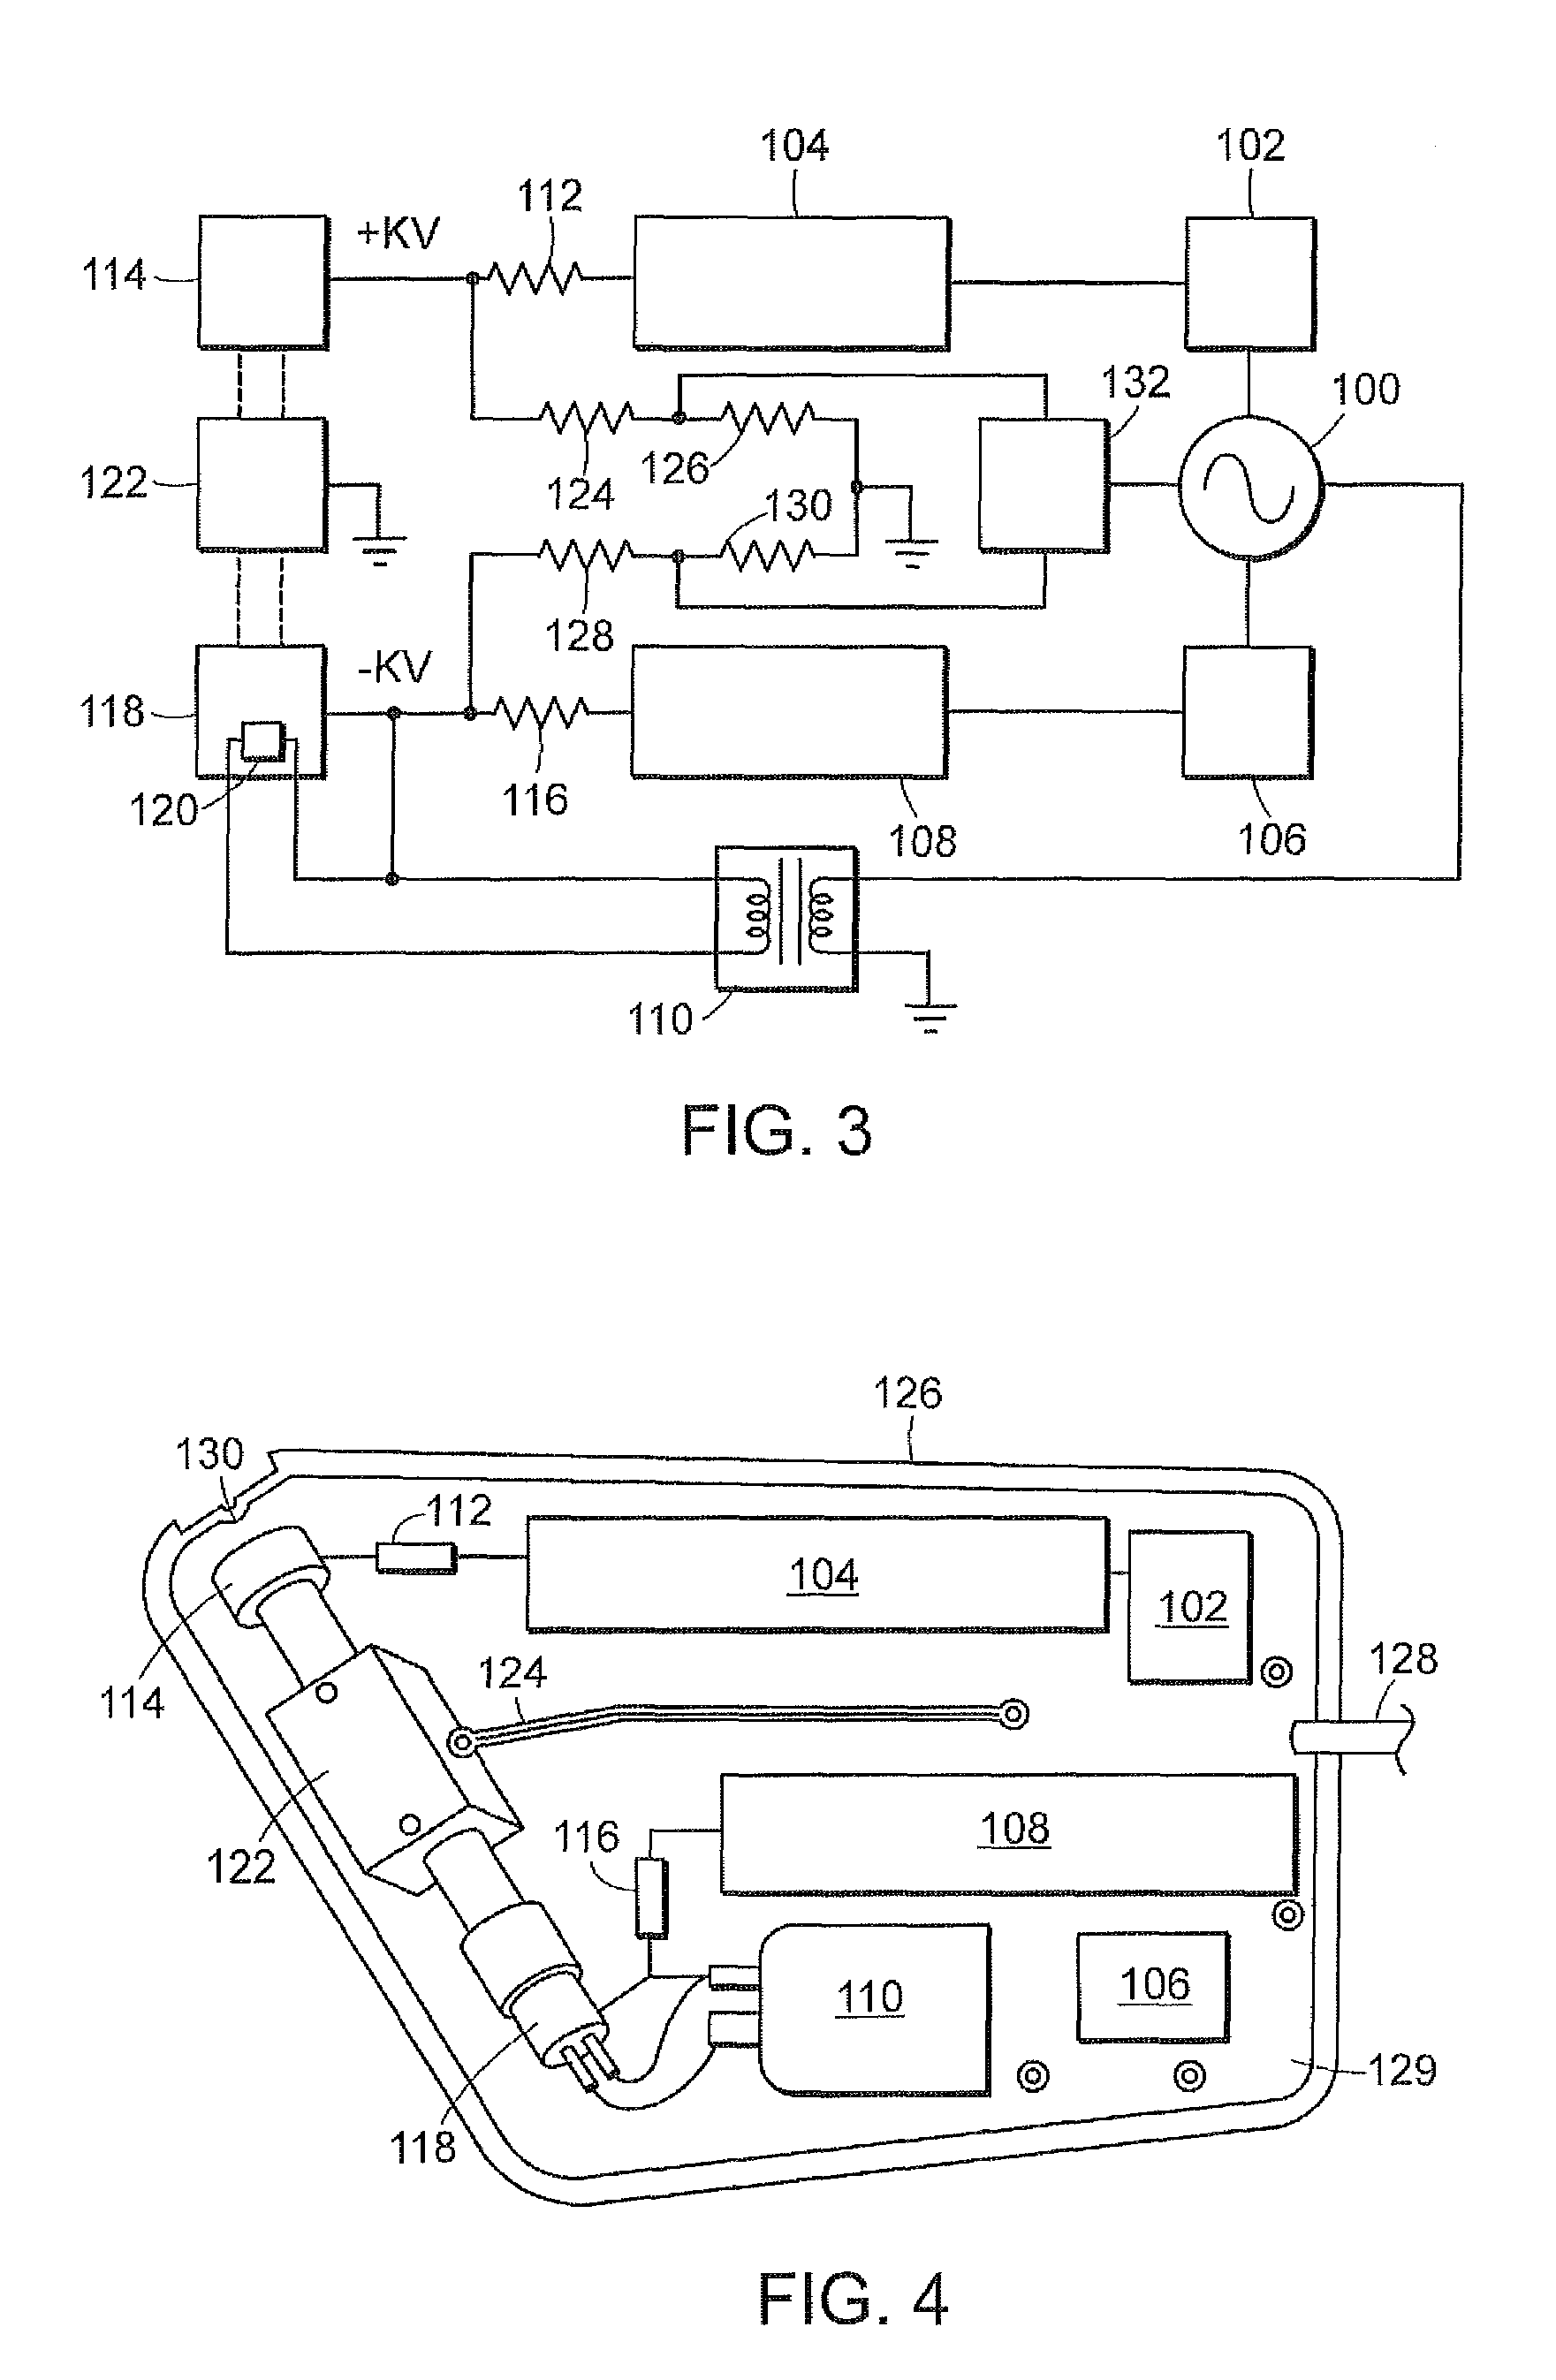 Compact high voltage X-ray source system and method for X-ray inspection applications